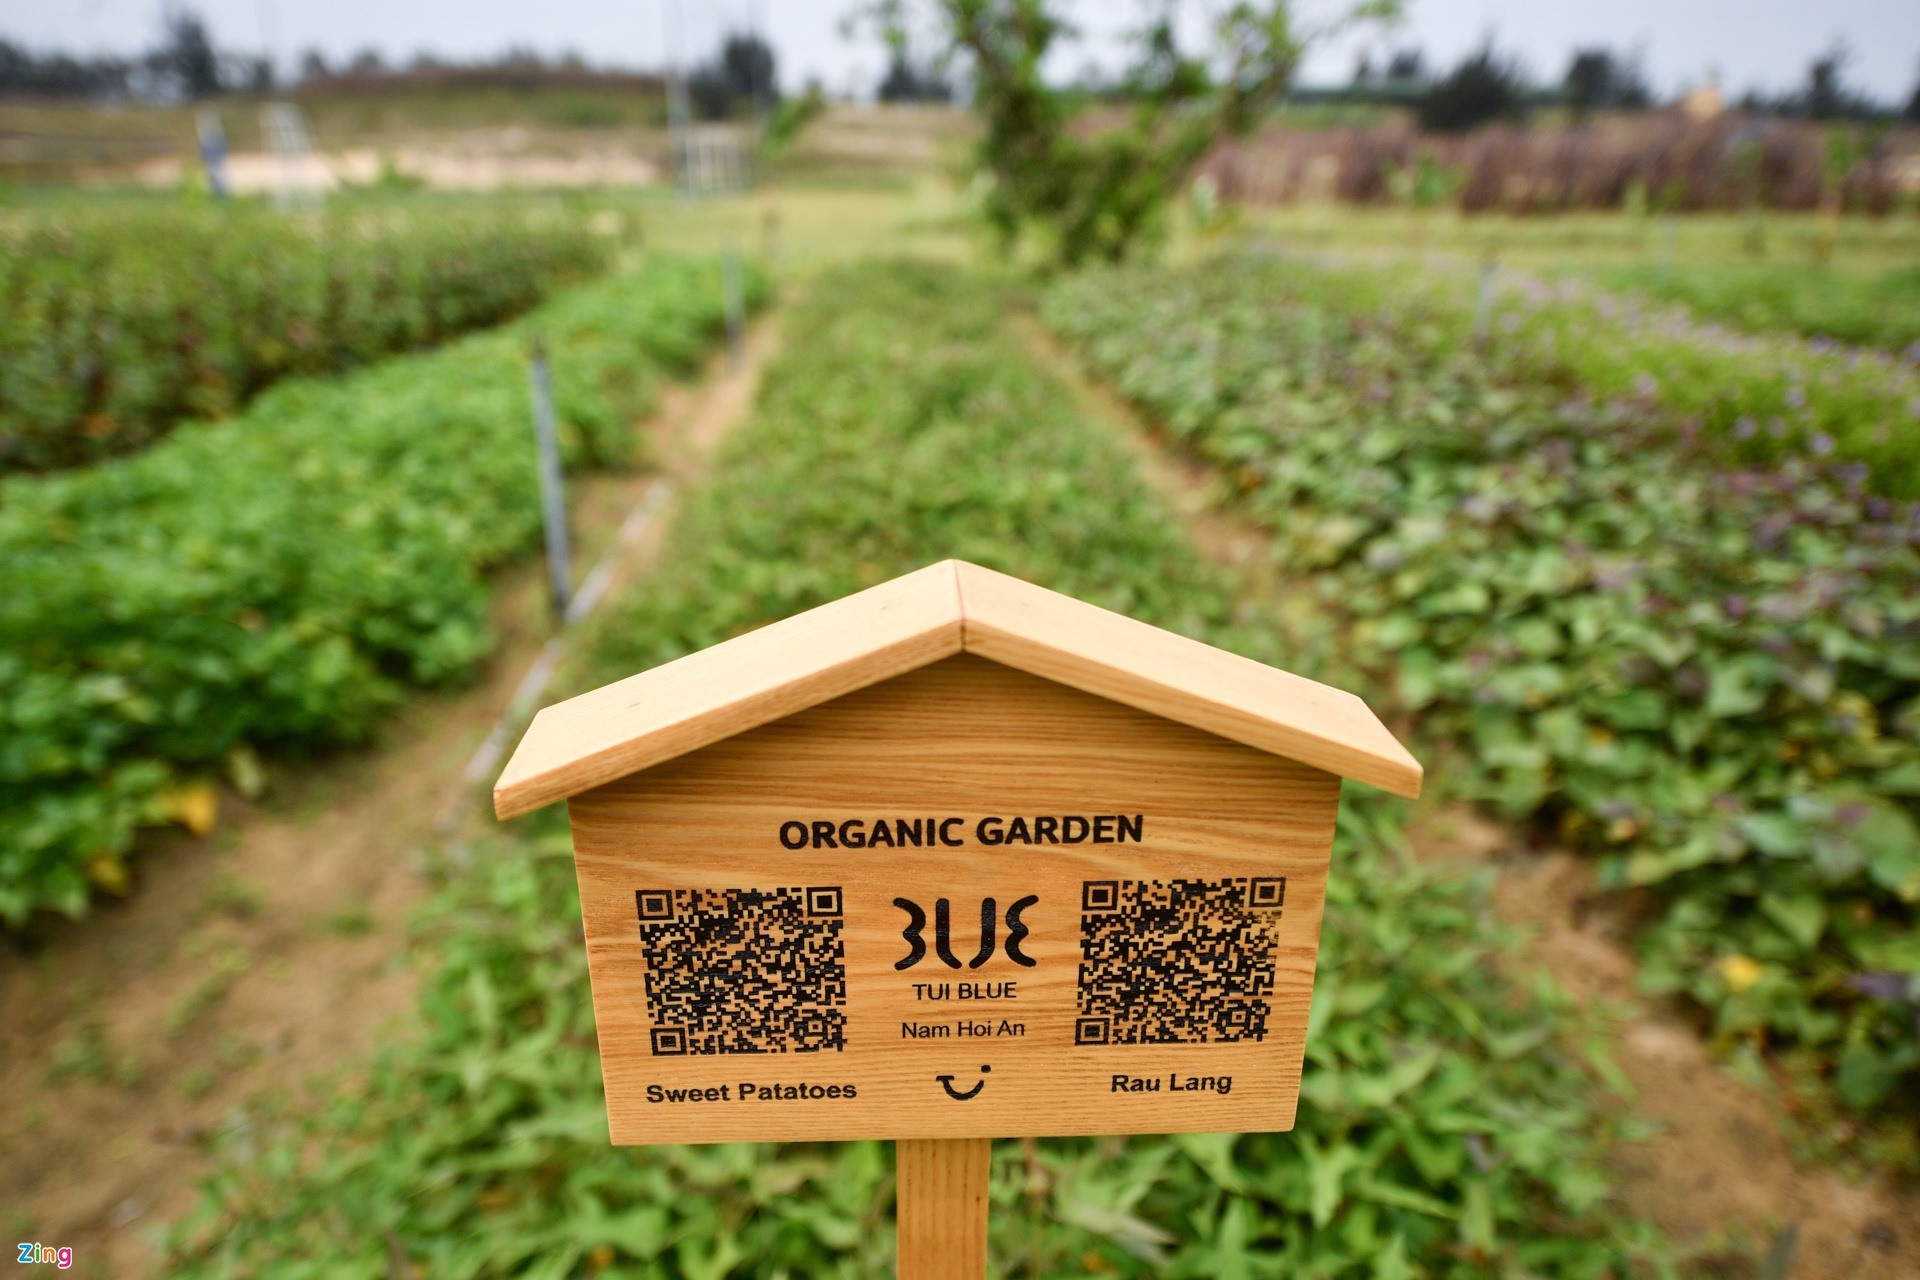 The vegetables are grown in the garden by organic methods for sustainable development of the resort.  Visitors can learn about the characteristics and nutritional ingredients of the dishes made of/from vegetables planted in the garden by scanning the QR code.